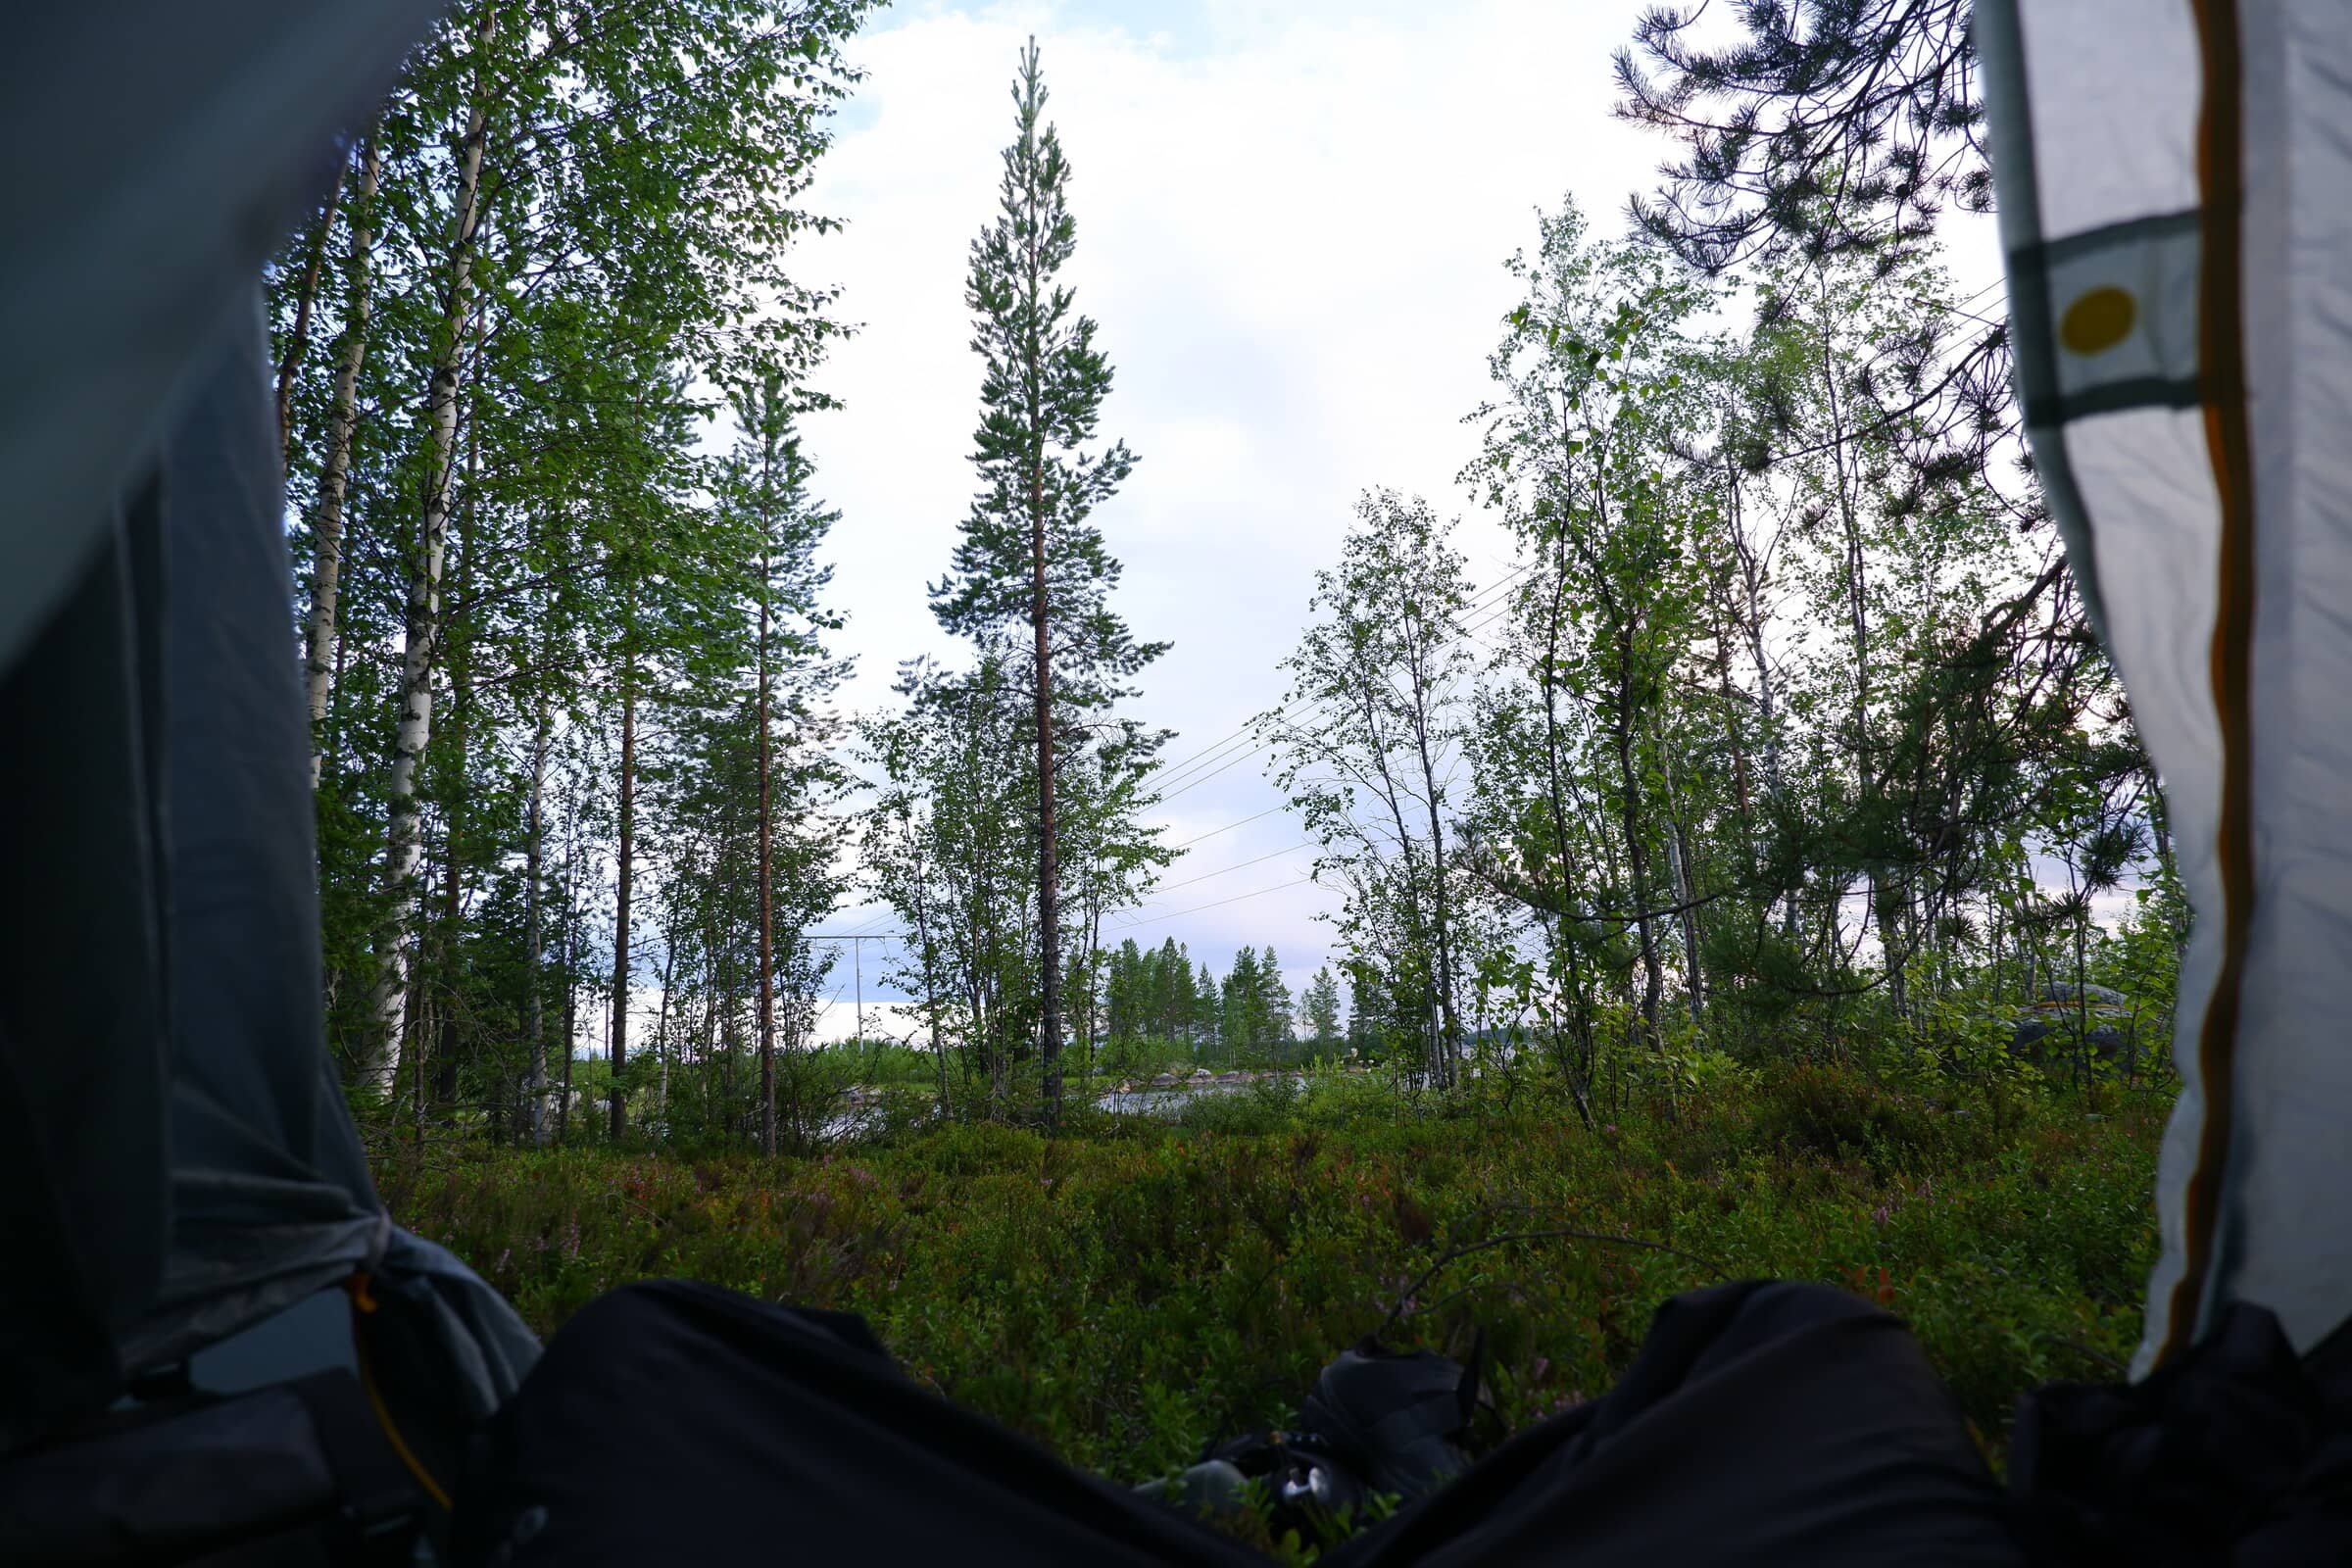 View from inside my tent. There's a couple trees, and a lot of moss outside.